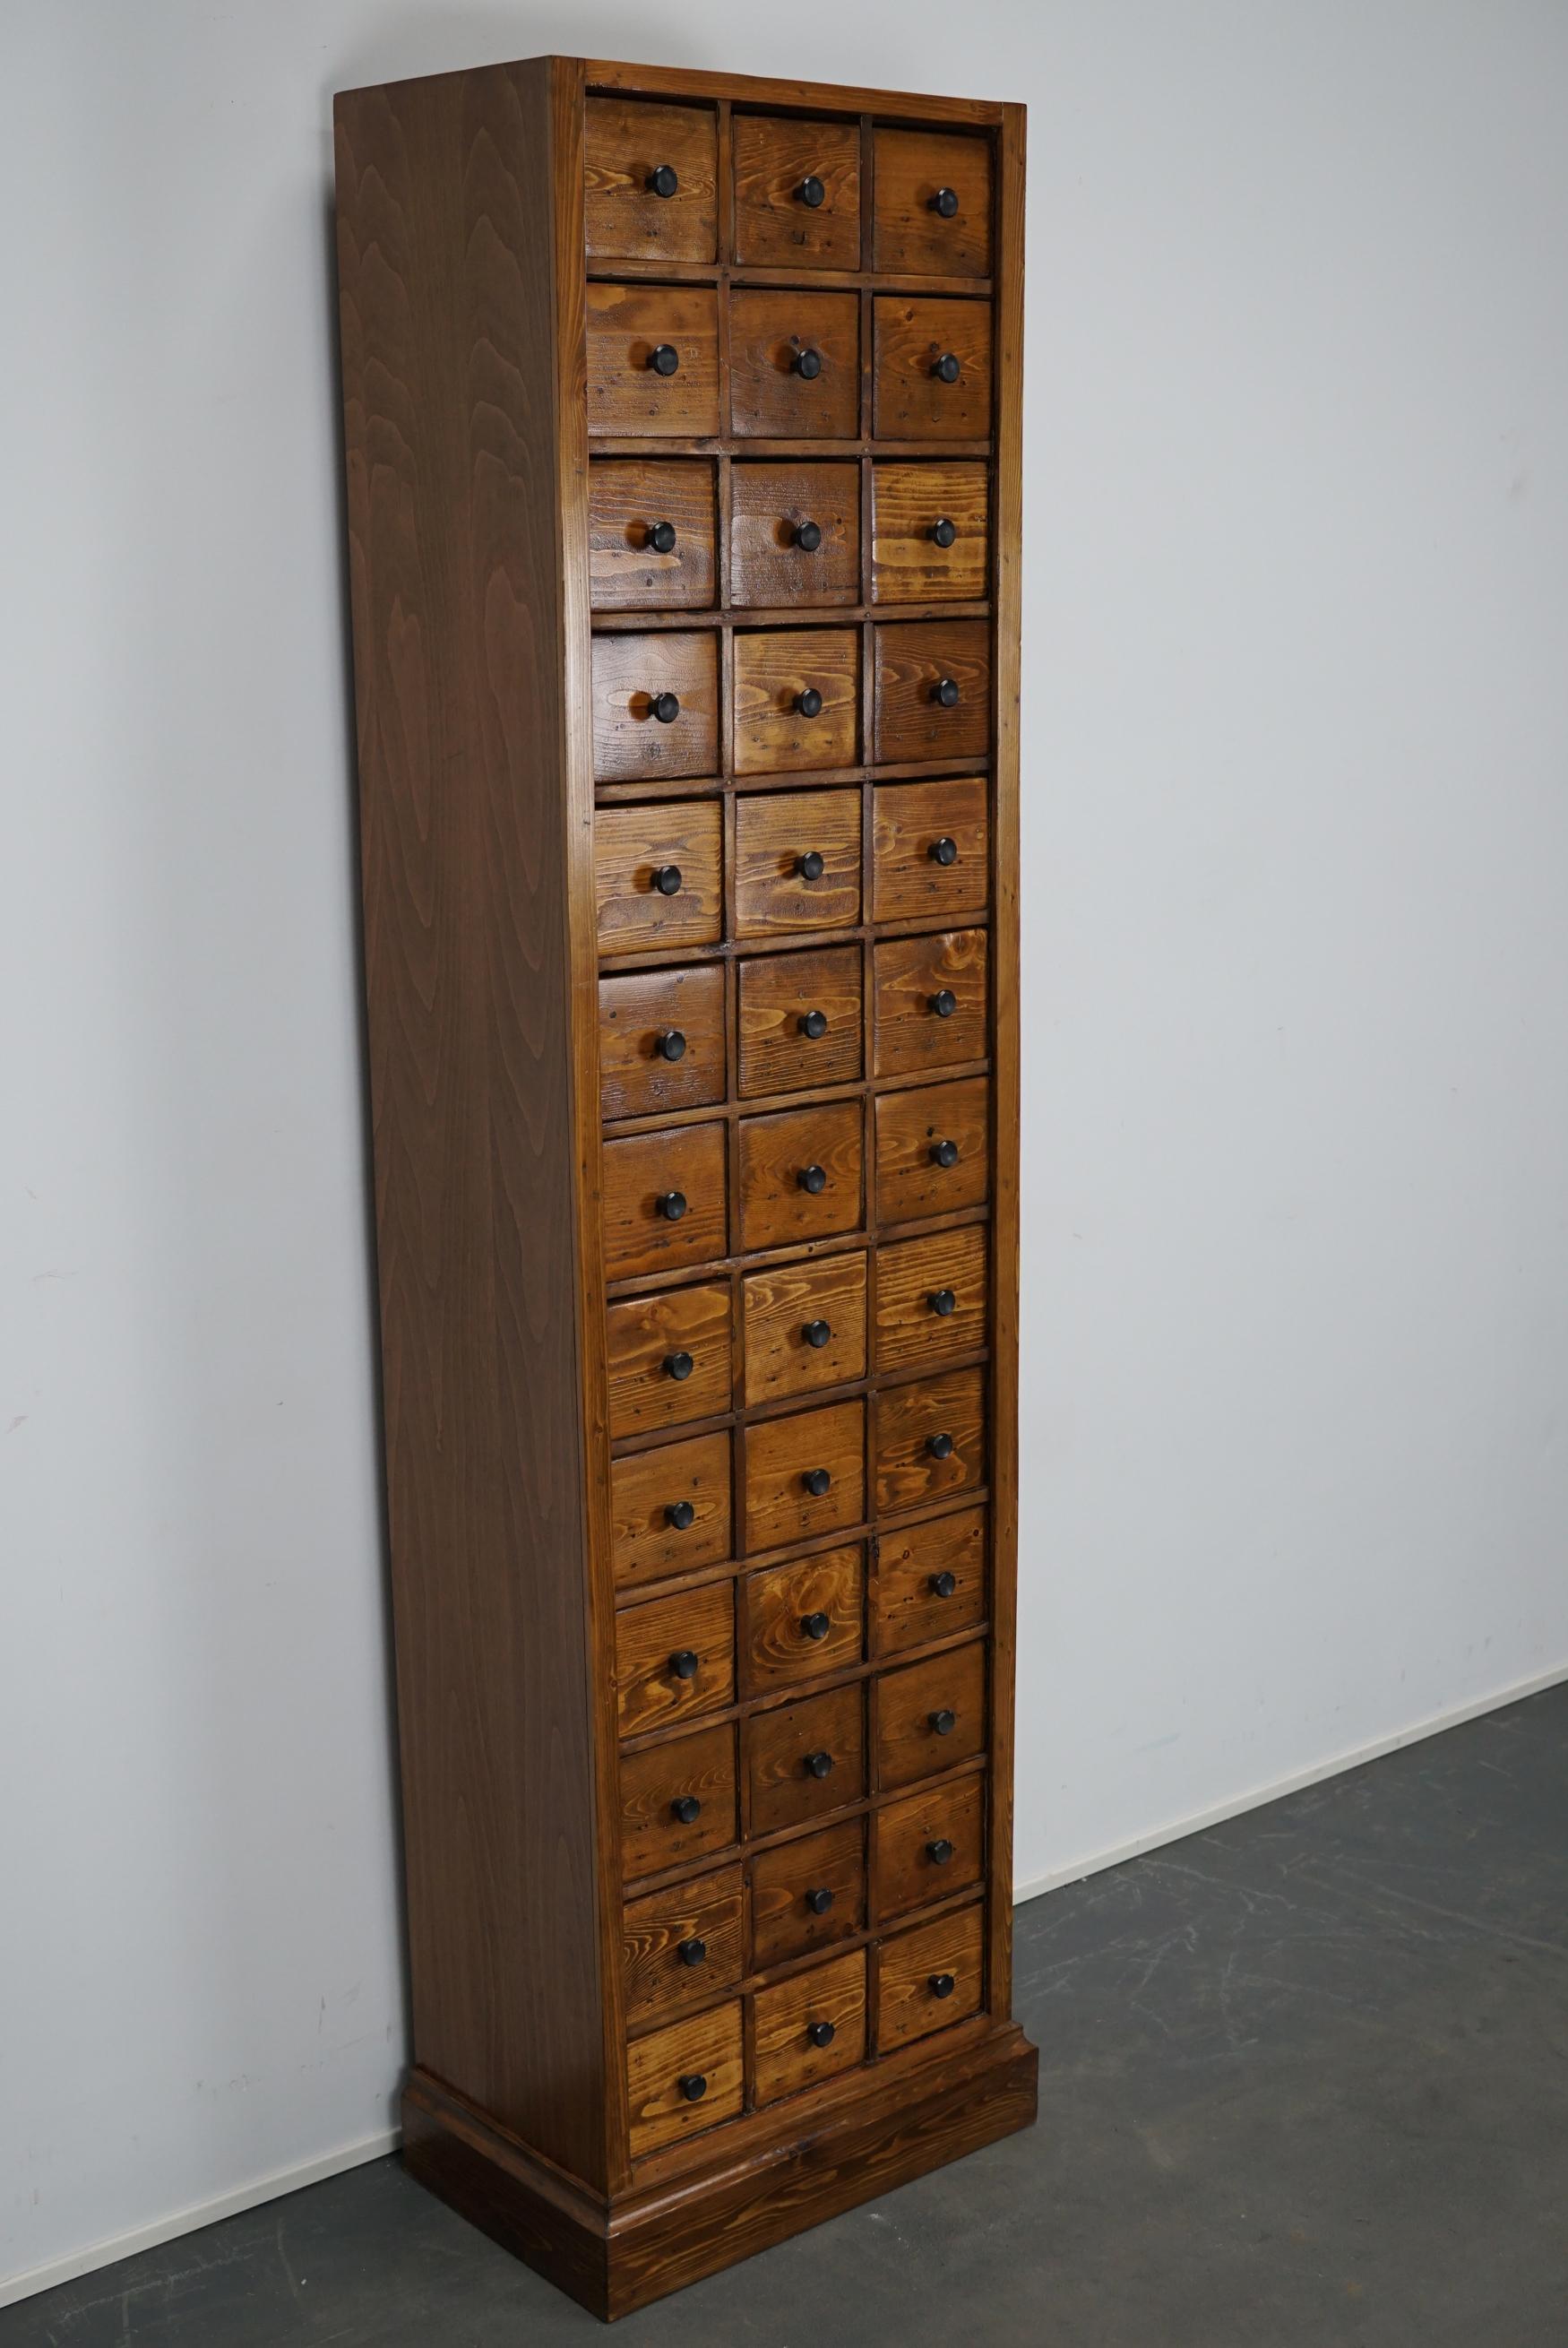 This apothecary cabinet of drawers was designed, circa 1950s in the Netherlands. The piece is made from pine and features 39 drawers with metal hardware. The interior dimensions of the drawers are: D 25 x W 11.5 x H 11 cm.